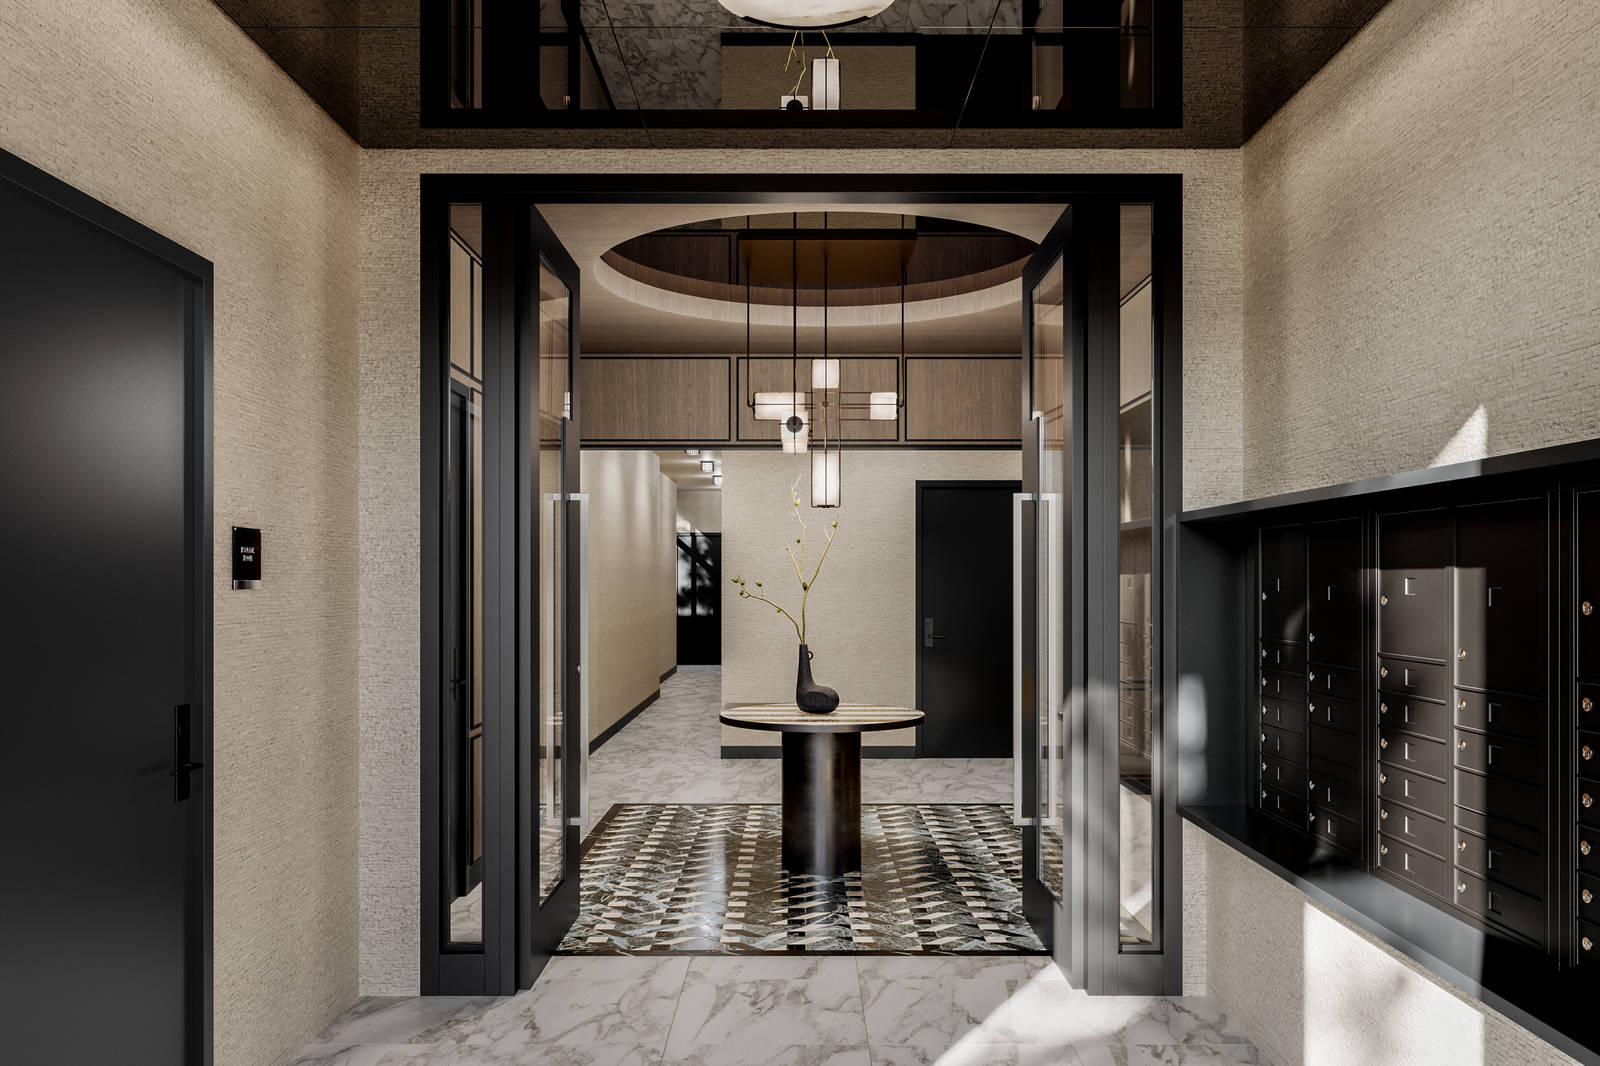 Modery lobby view with matte black mailboxes on right, white, gray and black marbley floor tiles, large glass doors with matte black framing and contemporary lighting